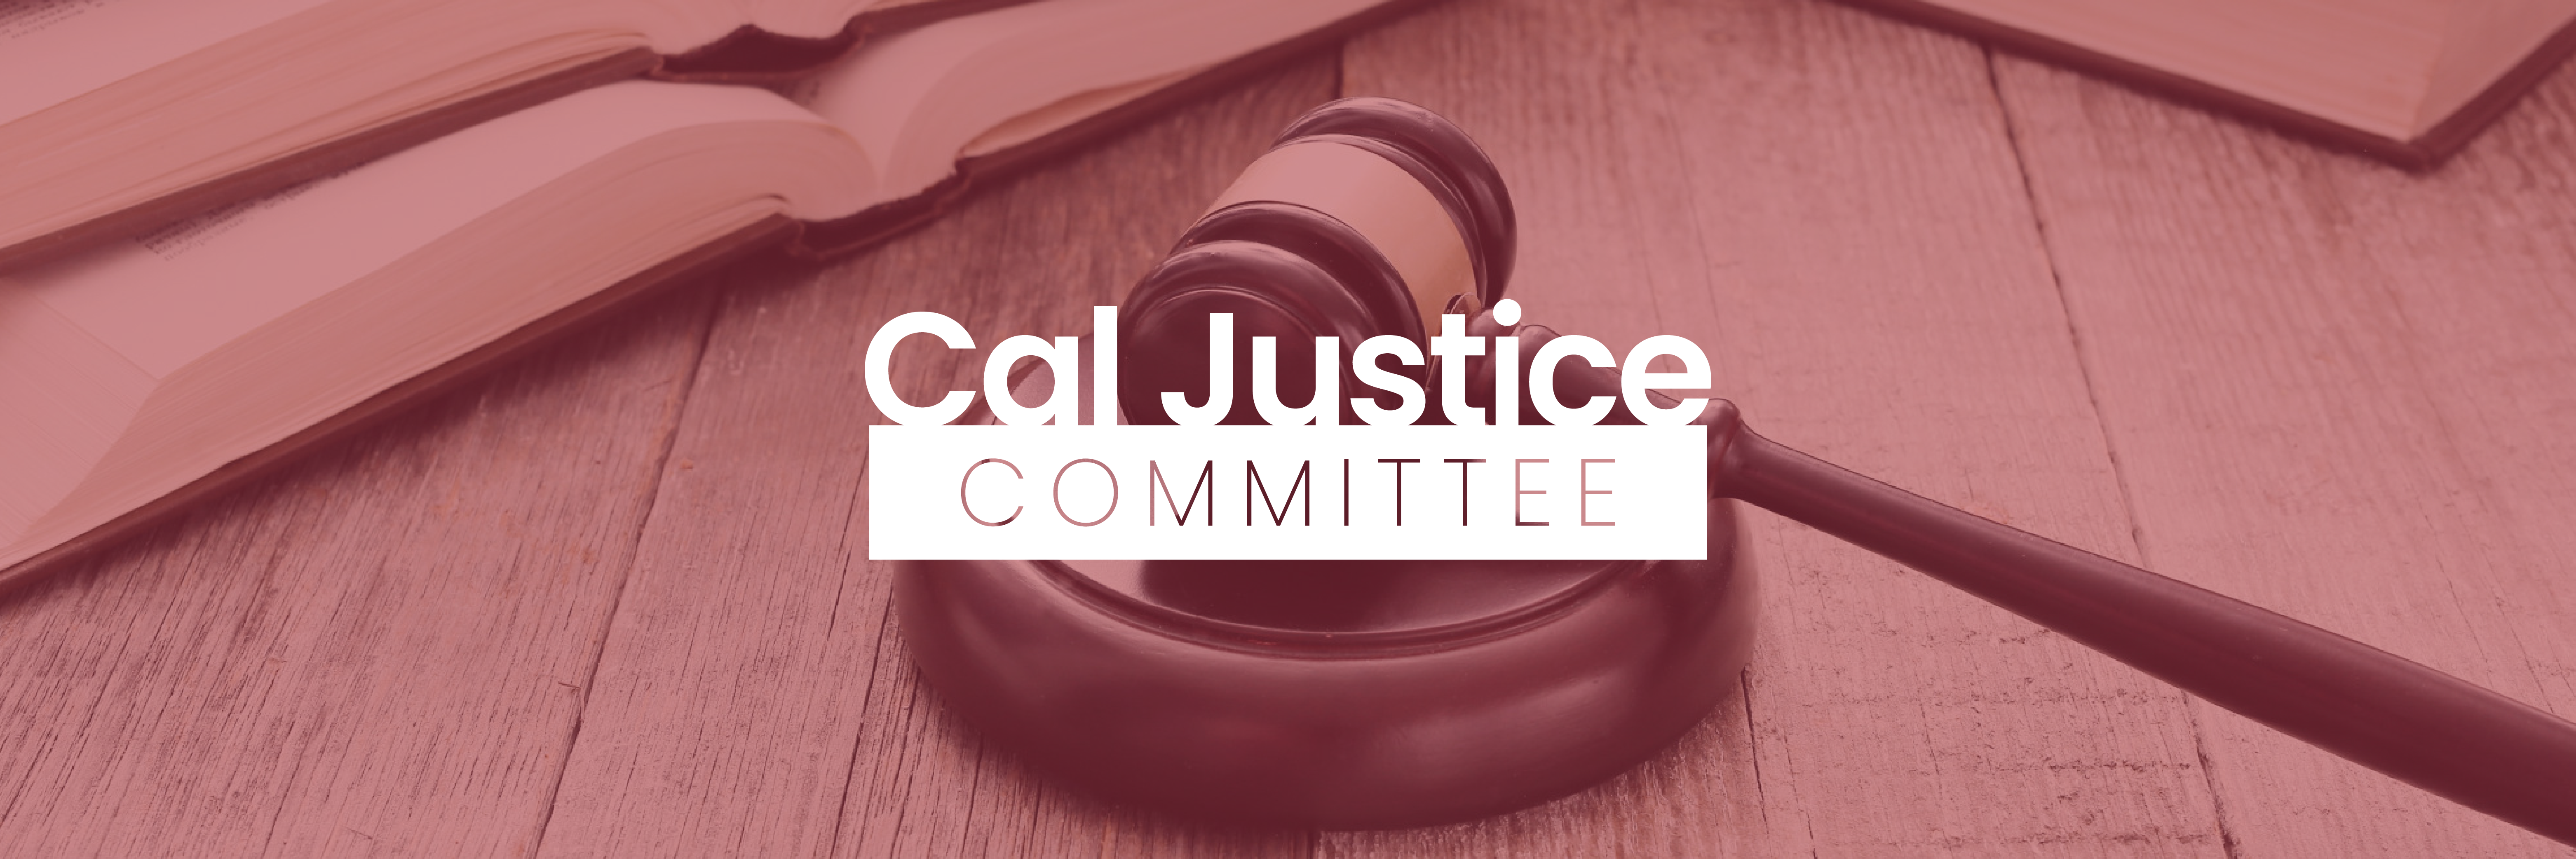 Cal Justice Committee